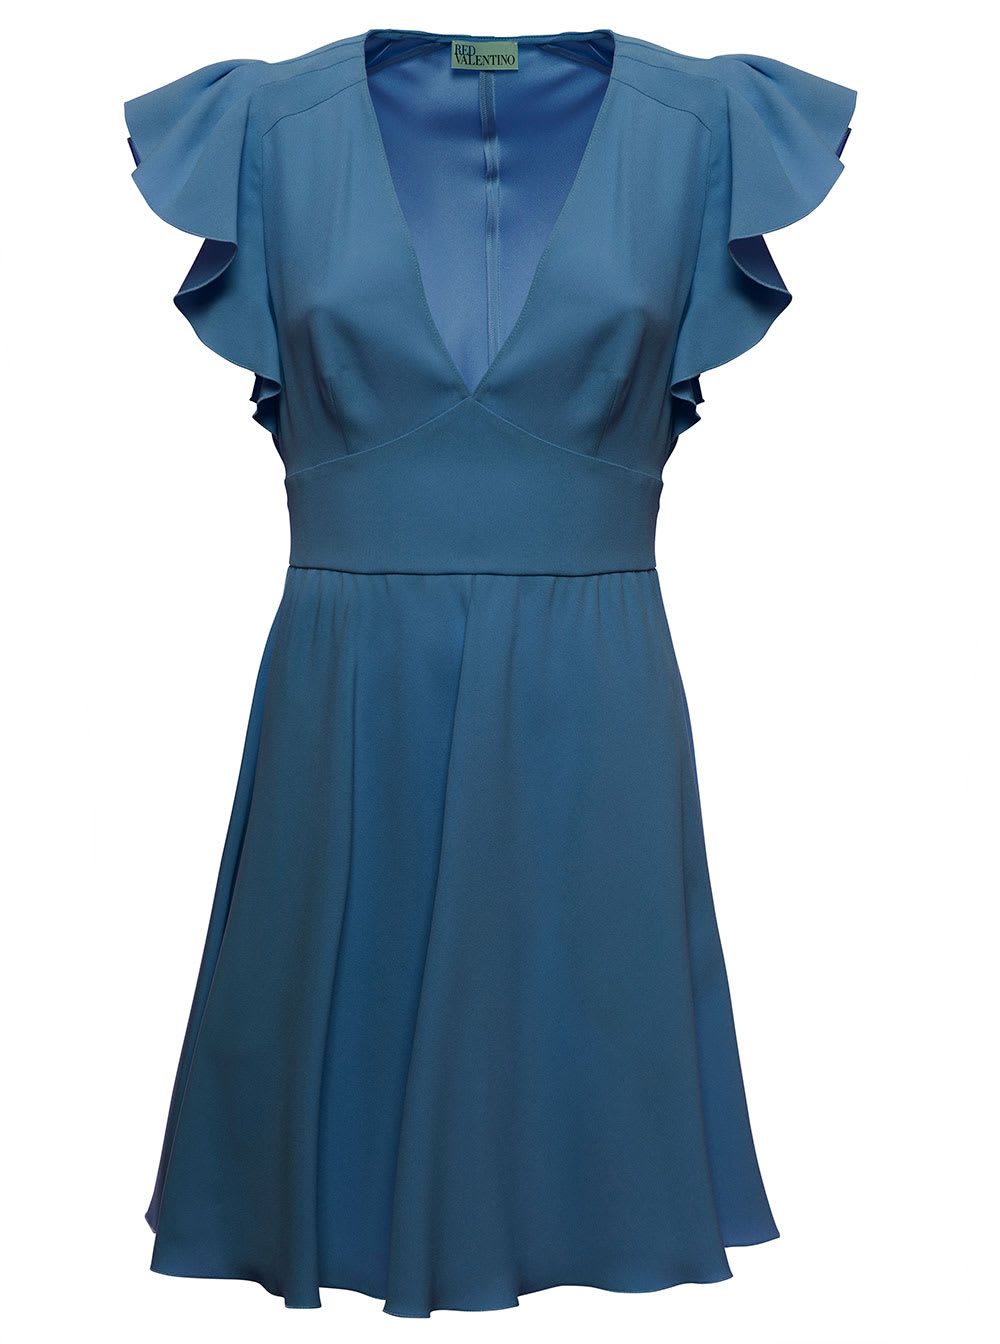 RED Valentino Light Blue Viscose Blend Dress With Ruffles And Bow